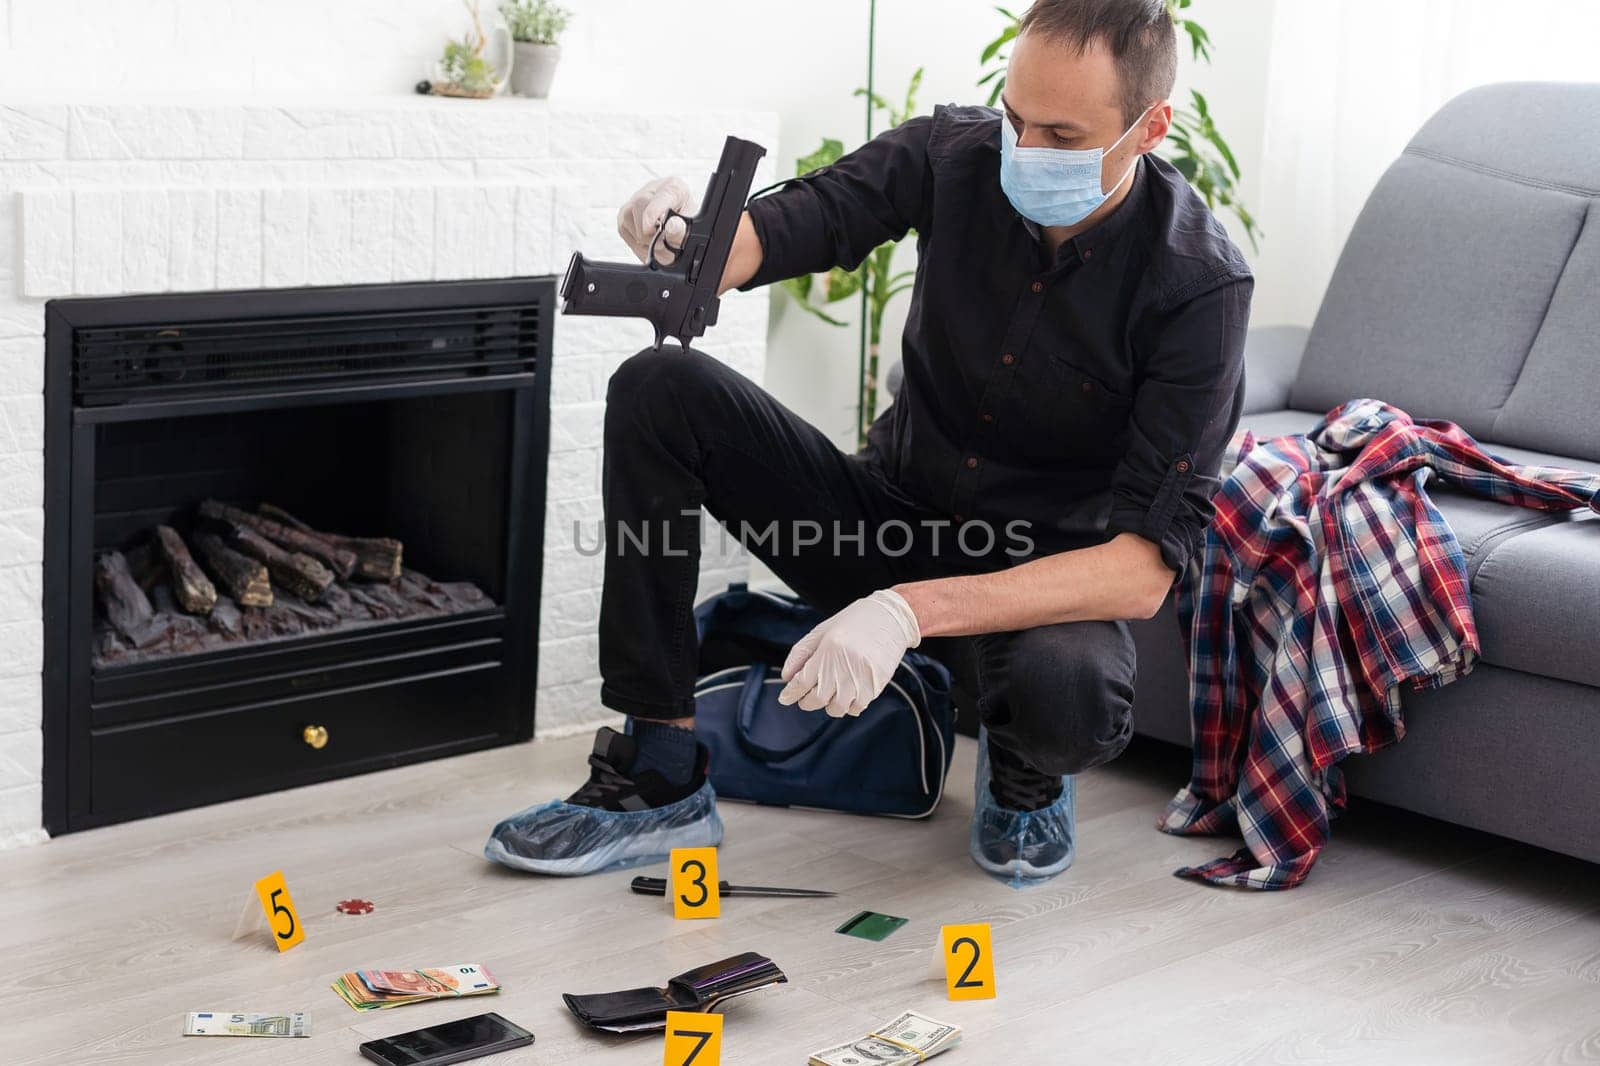 Criminological expert collecting evidence at the crime scene. High quality photo